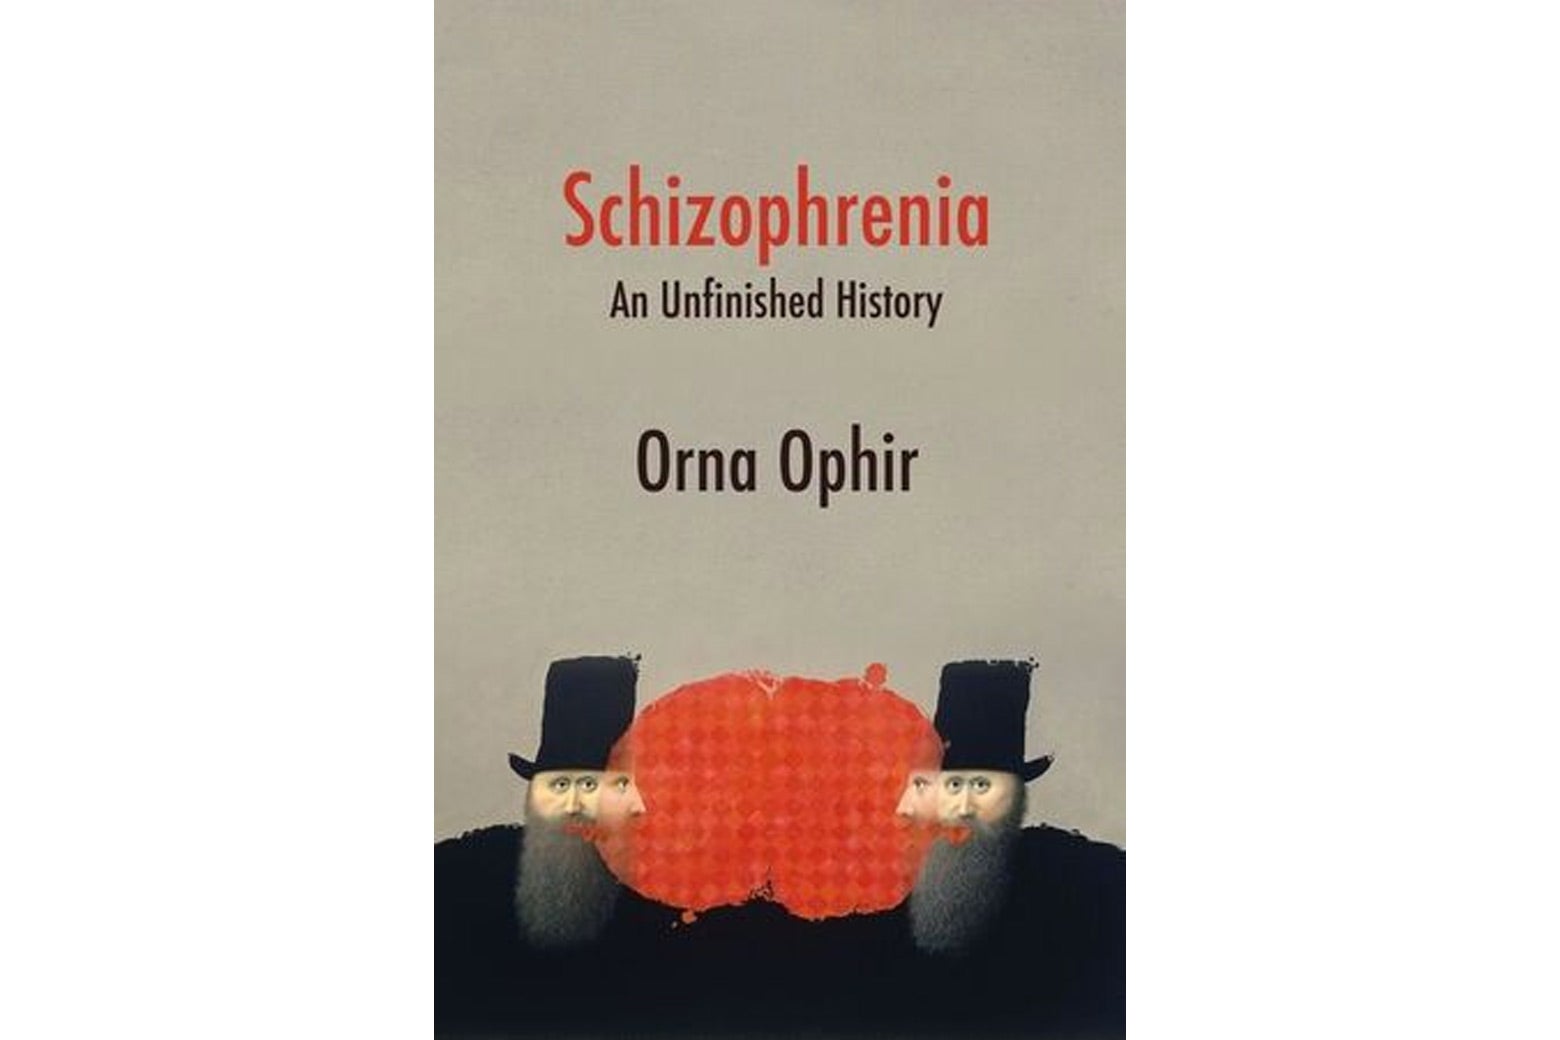 The cover of Schizophrenia by Orna Ophir.